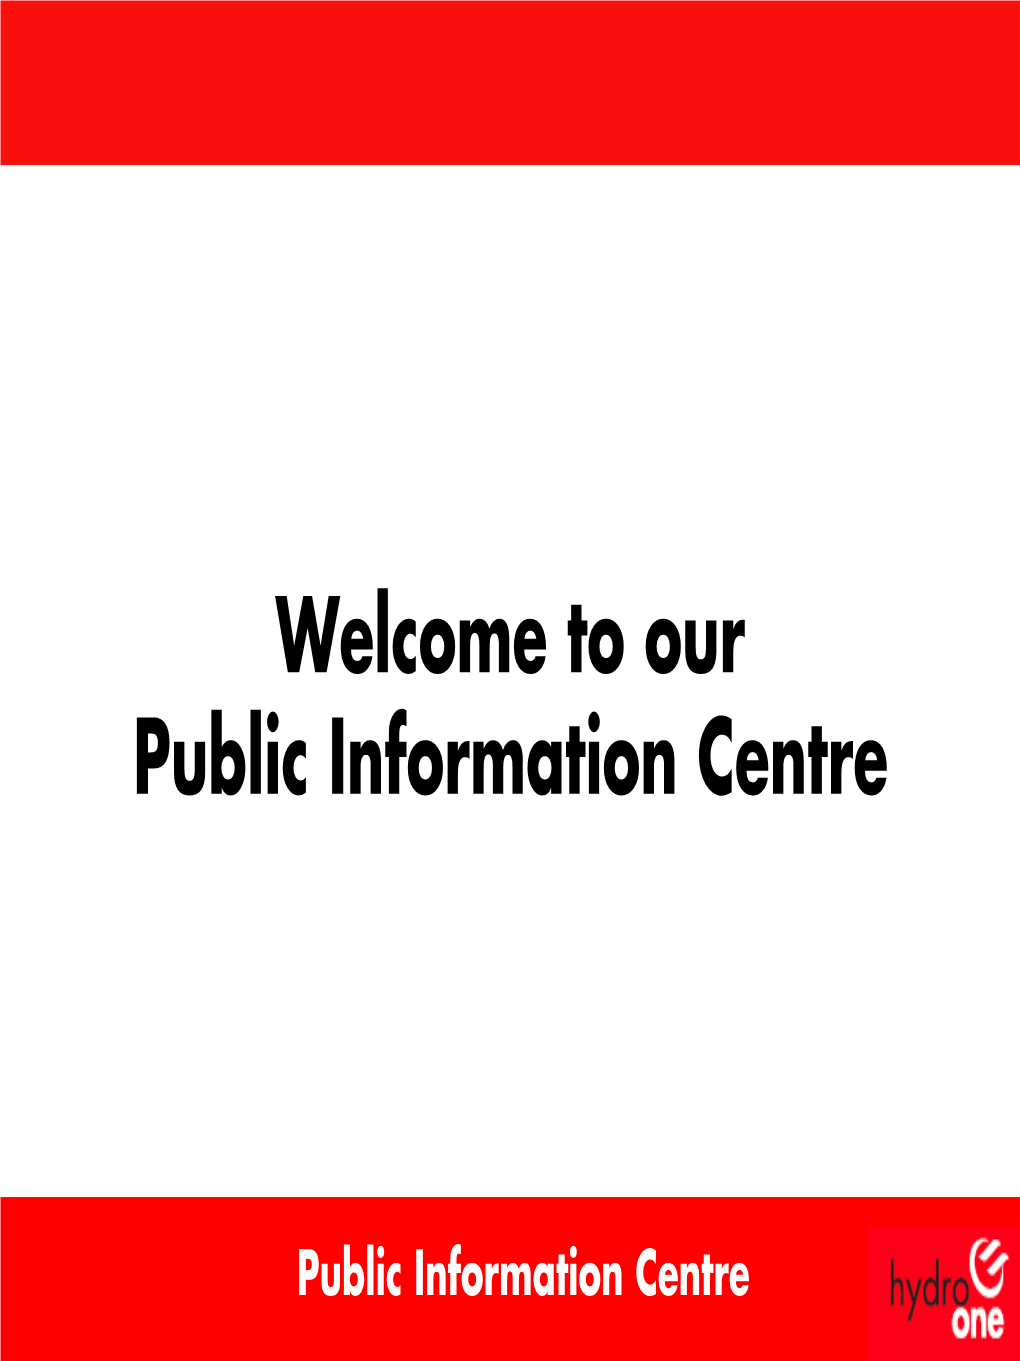 Welcome to Our Public Information Centre